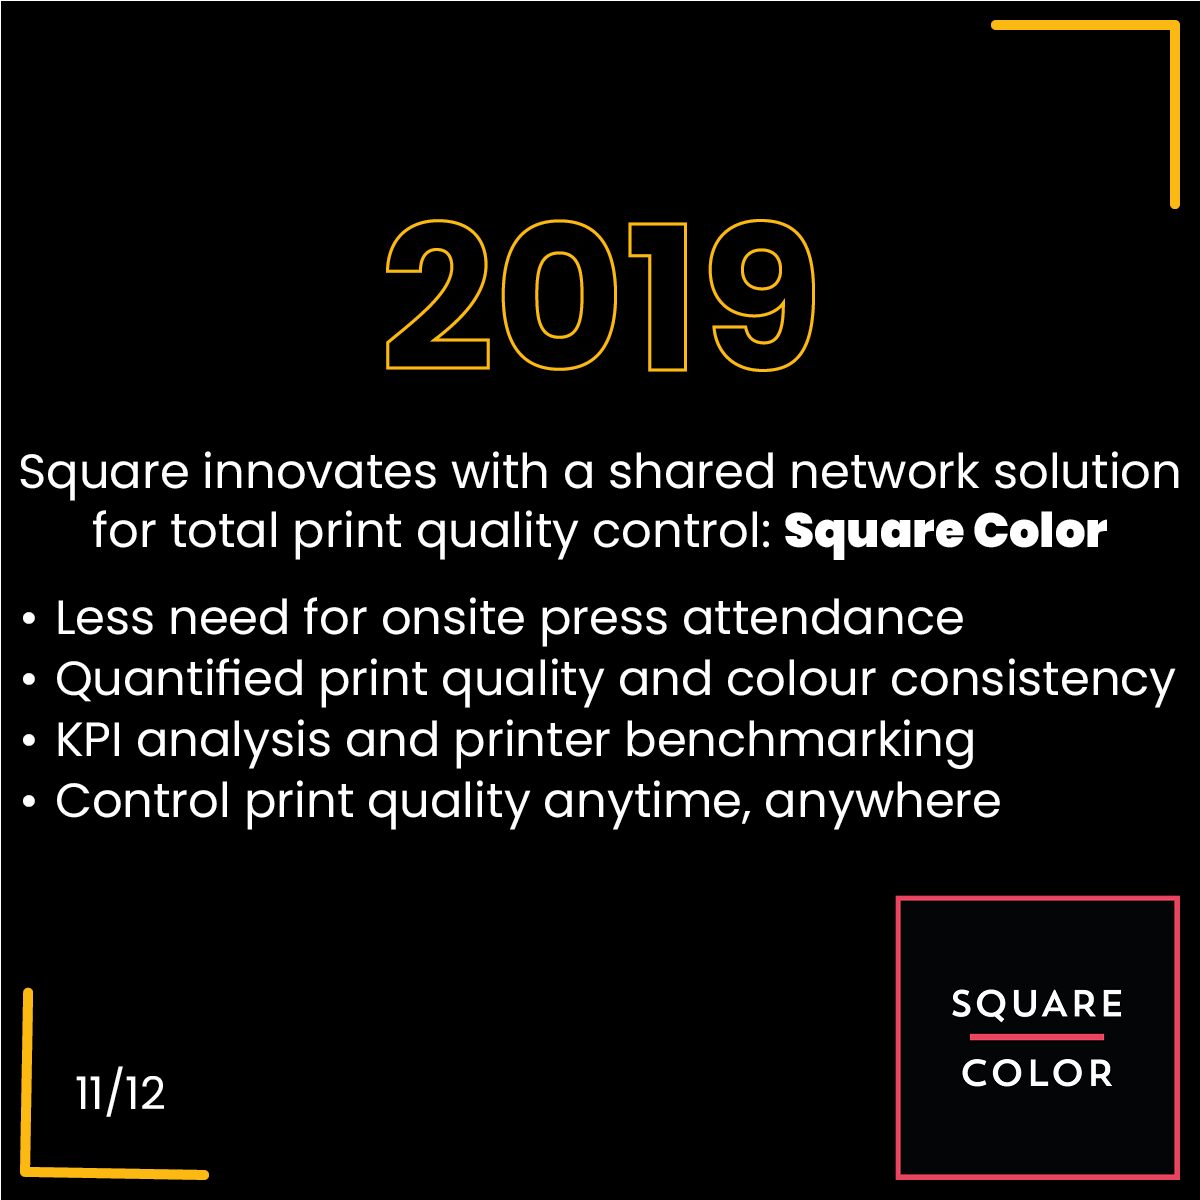 2019, Square innovates with a shared network solution for total print quality control: Square Color. Less need for onsite press attendance, Quantified print quality and colour consistency, KPI analysis and printer benchmarking, Control print quality anytime, anywhere